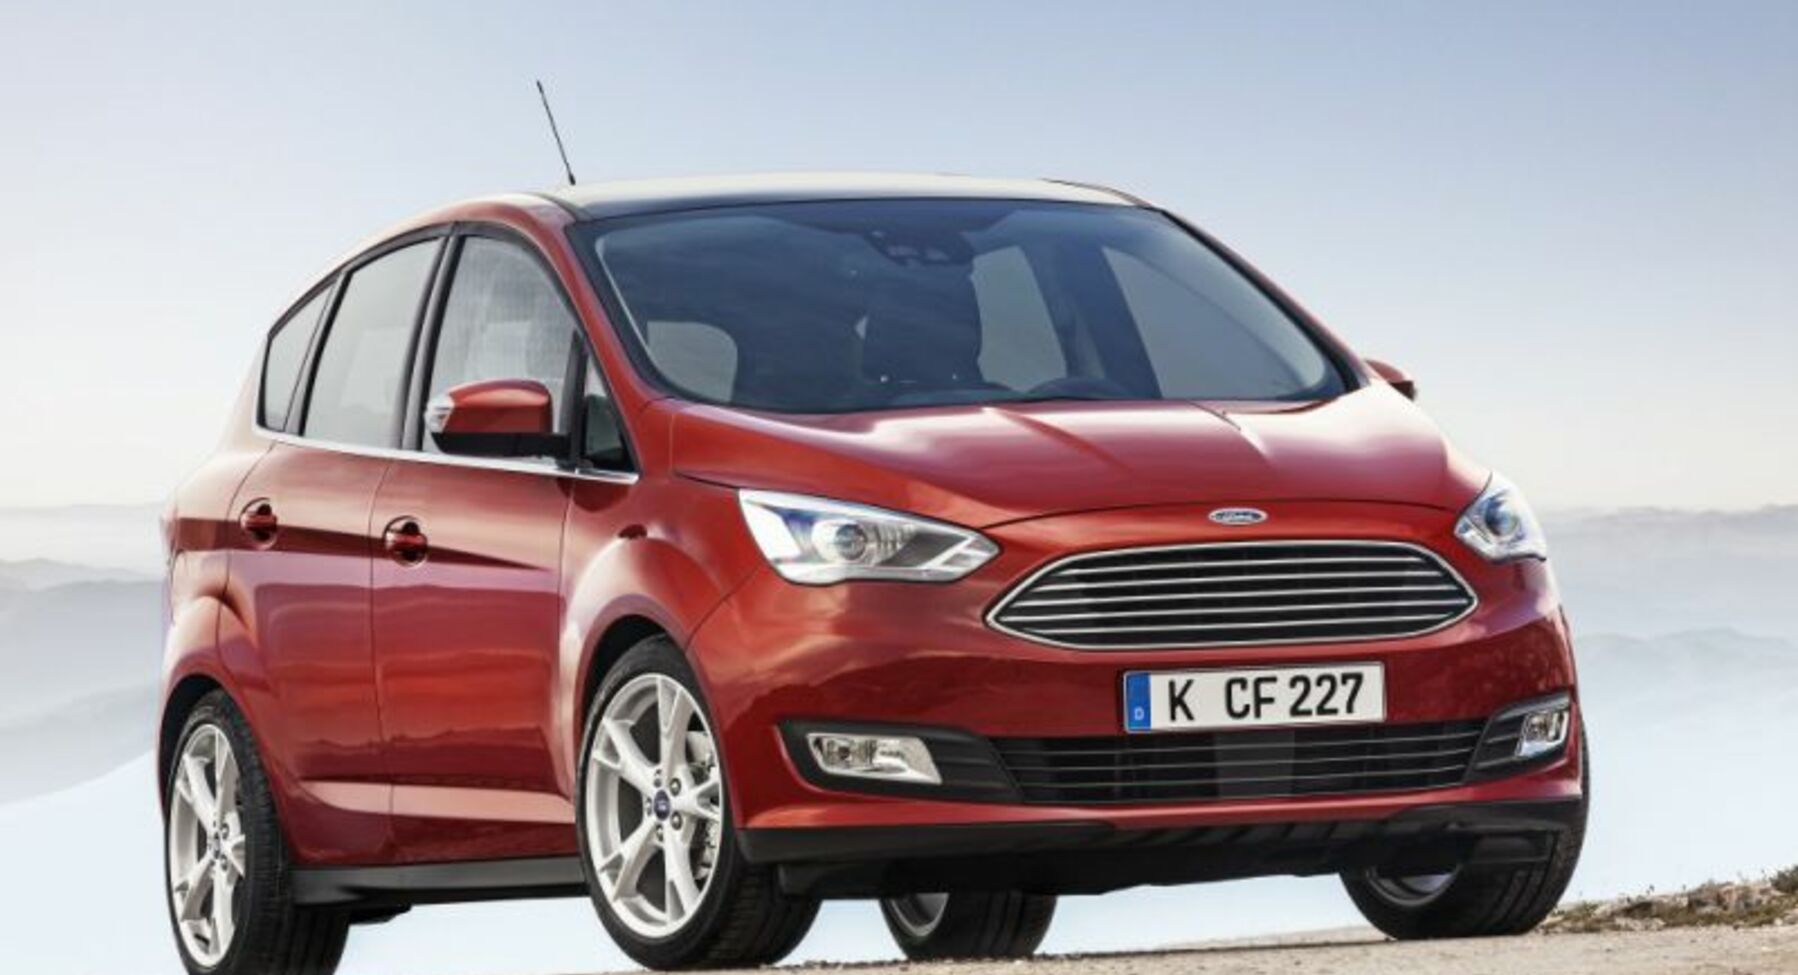 Ford C-MAX II (facelift 2015) 1.5 TDCi (120 Hp) S&S 2015, 2016, 2017, 2018, 2019, 2020, 2021 